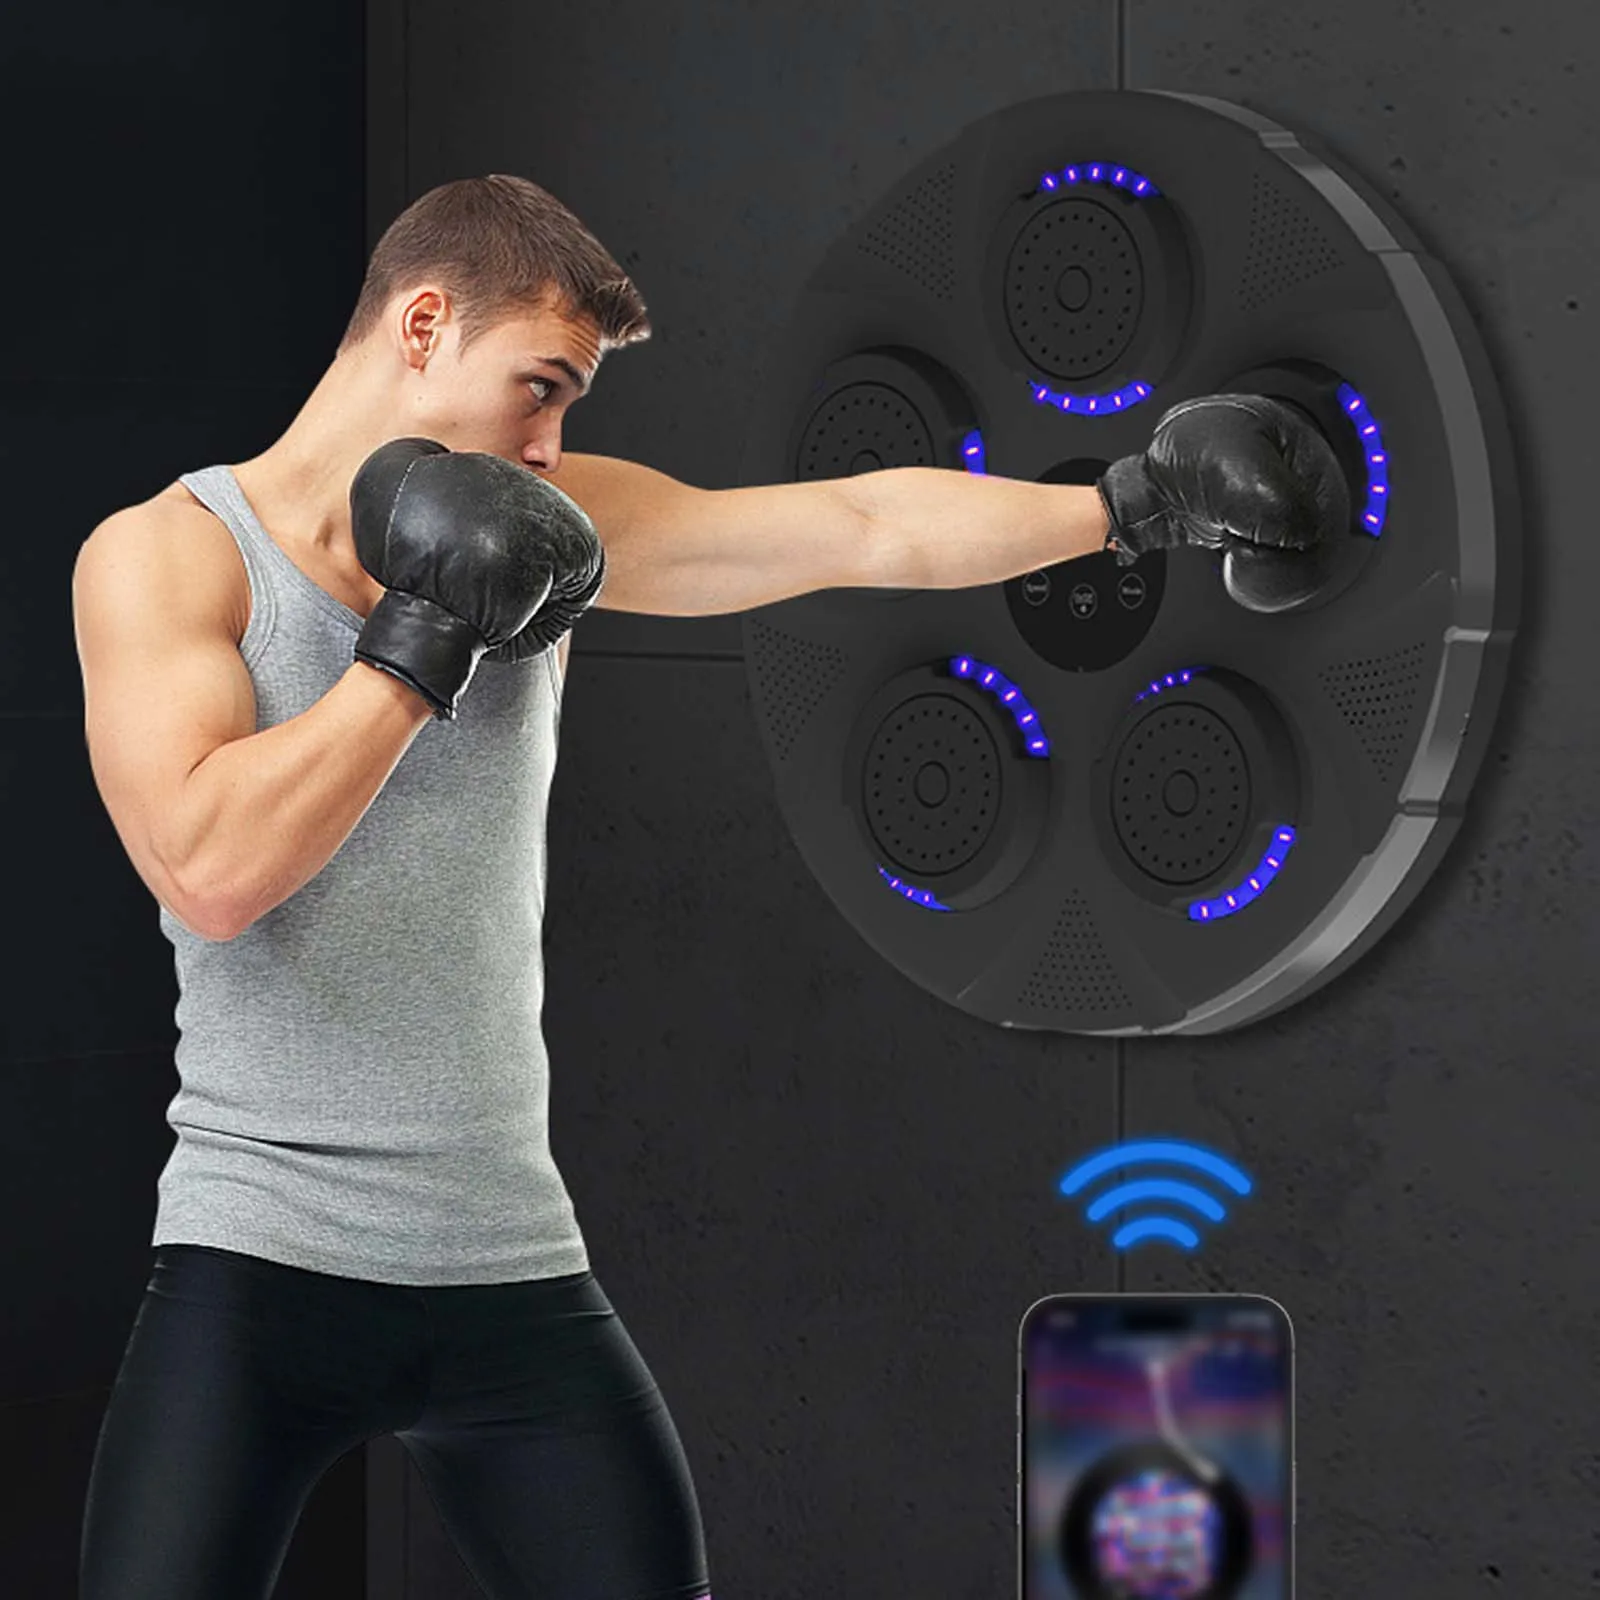 

Music Boxing Training Machine Portable Boxing Trainer Punching Pad Relaxing Reaction Target for Strength Training Exercise